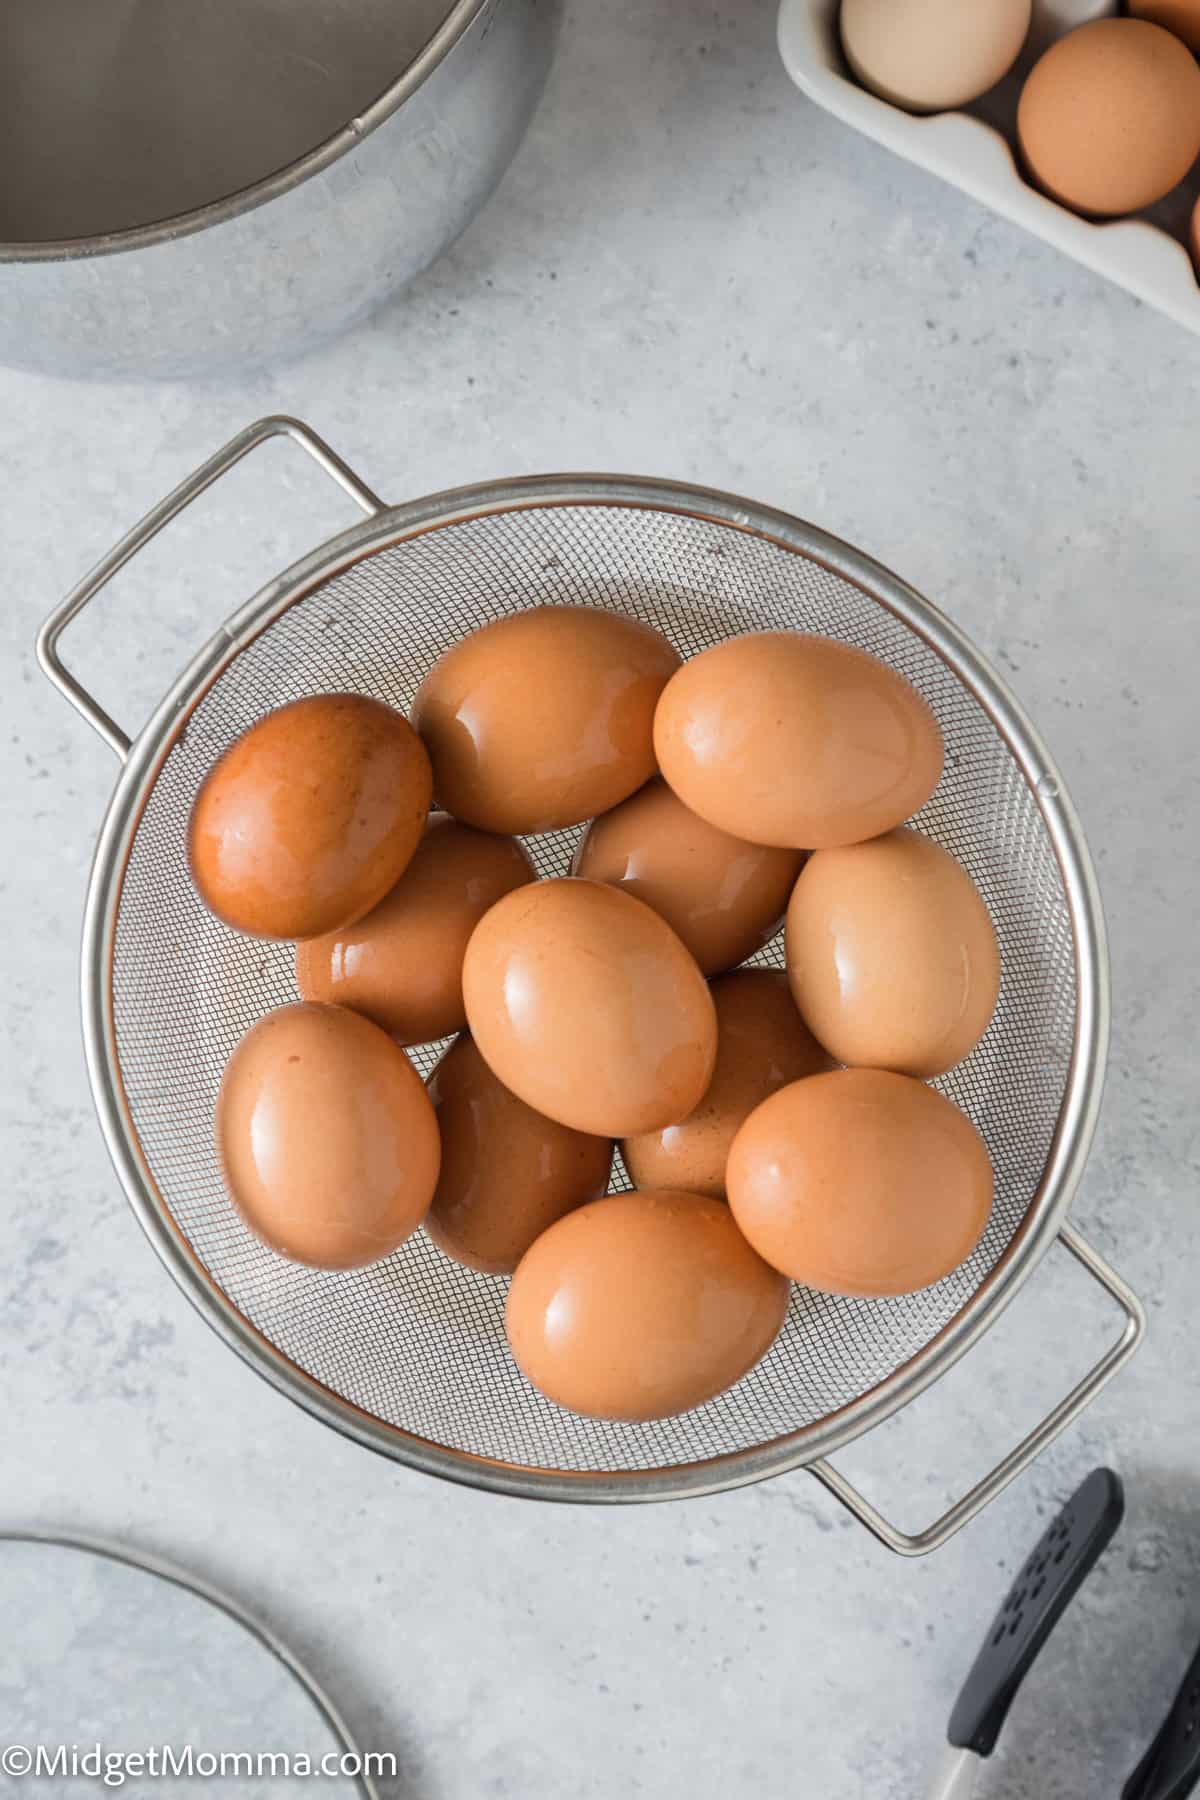 Brown eggs in a metal strainer on a kitchen counter, with a pot and additional eggs in the background.